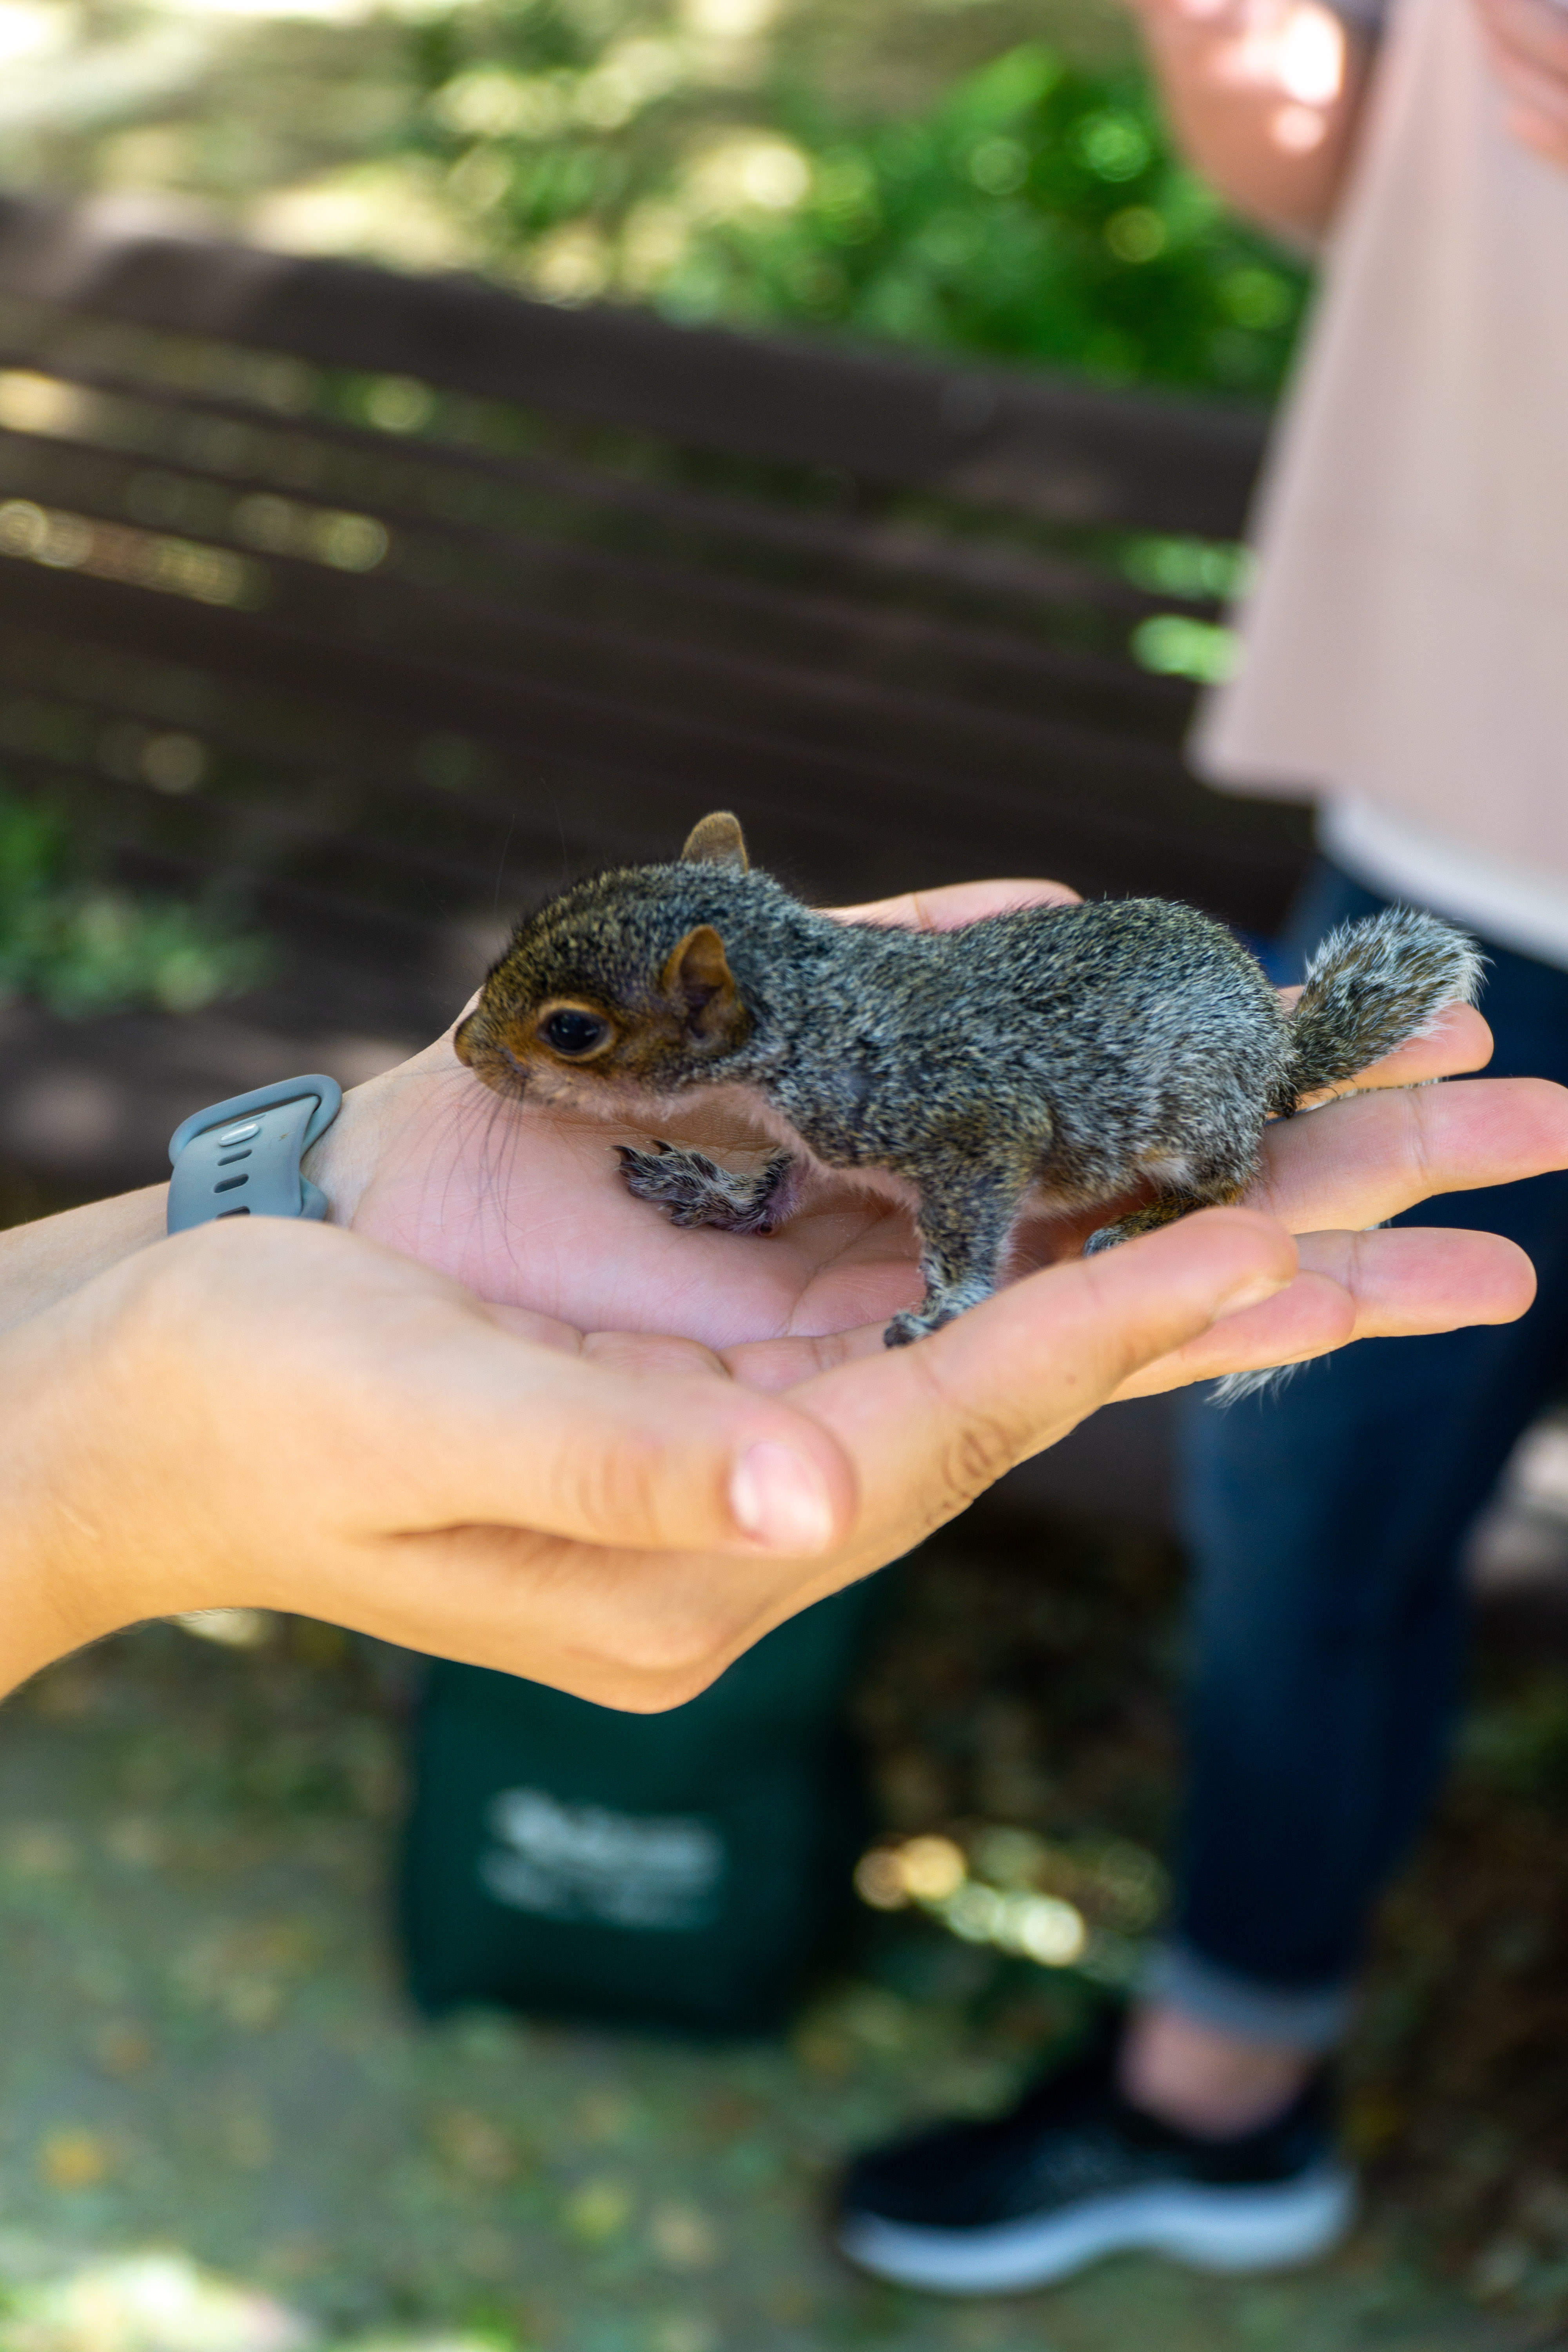 The baby squirrel rescued by Sarah Kegley. Photo credit: Thomas Bordeaux, ARCH 2022.